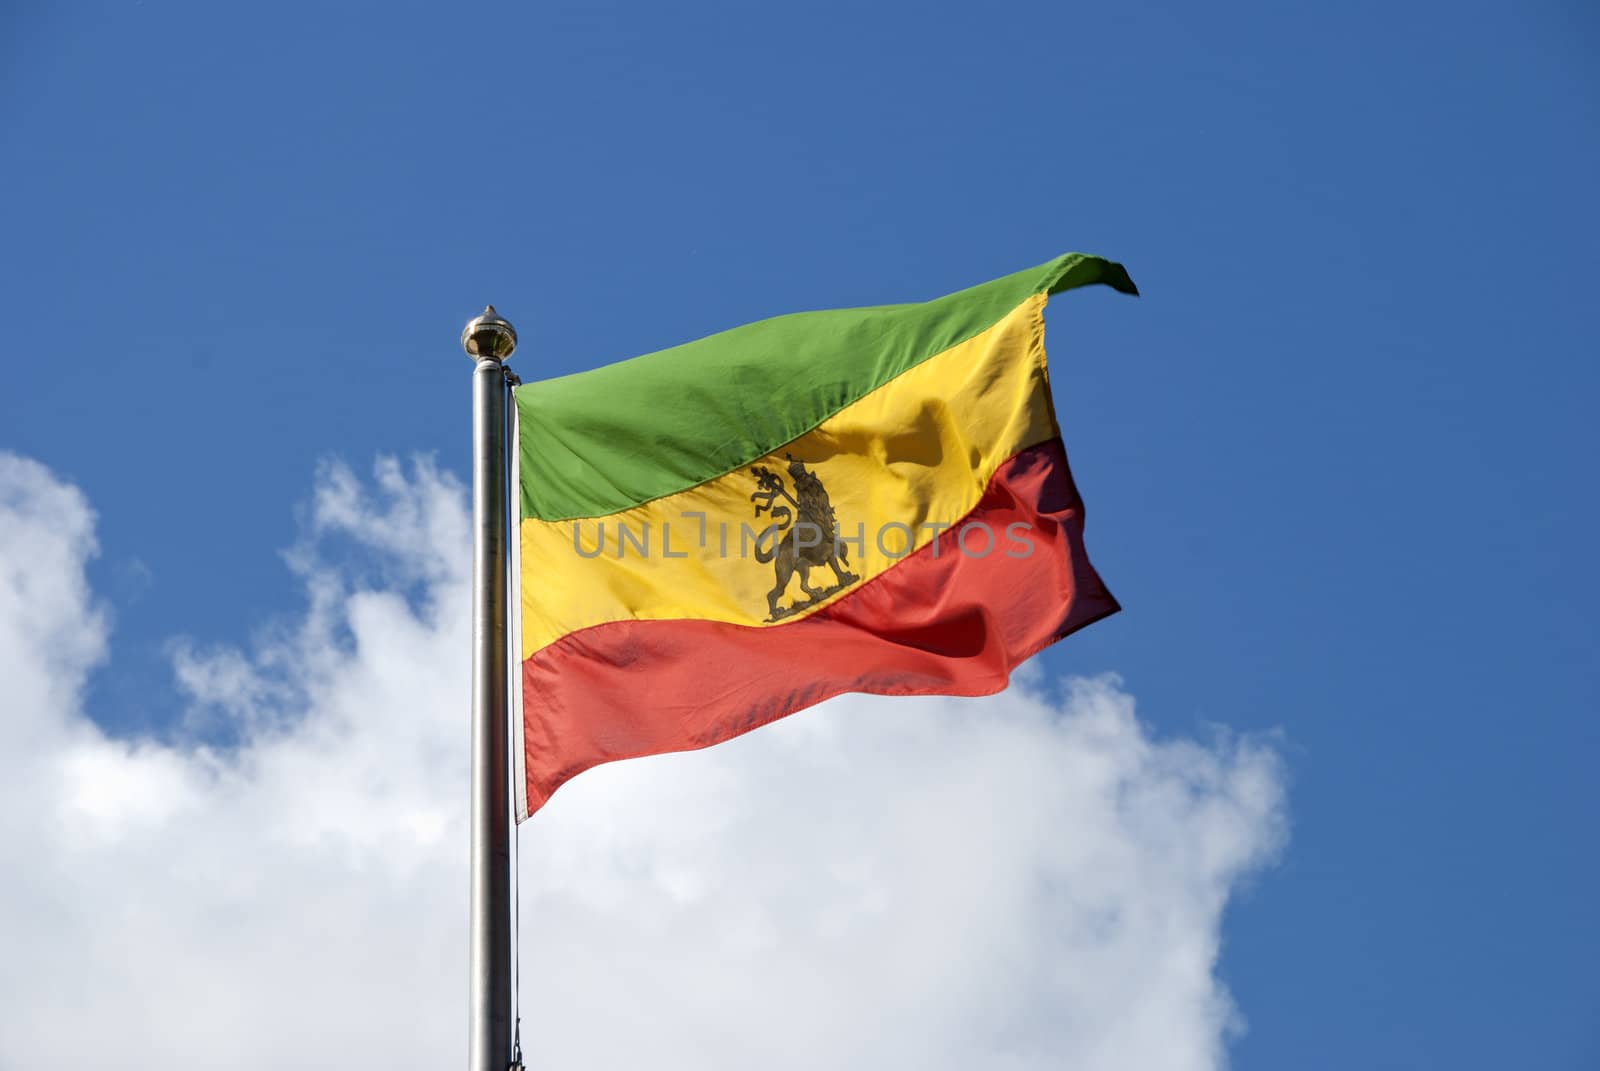 An Ethiopian Flag fluttering in the wind under a blue sky